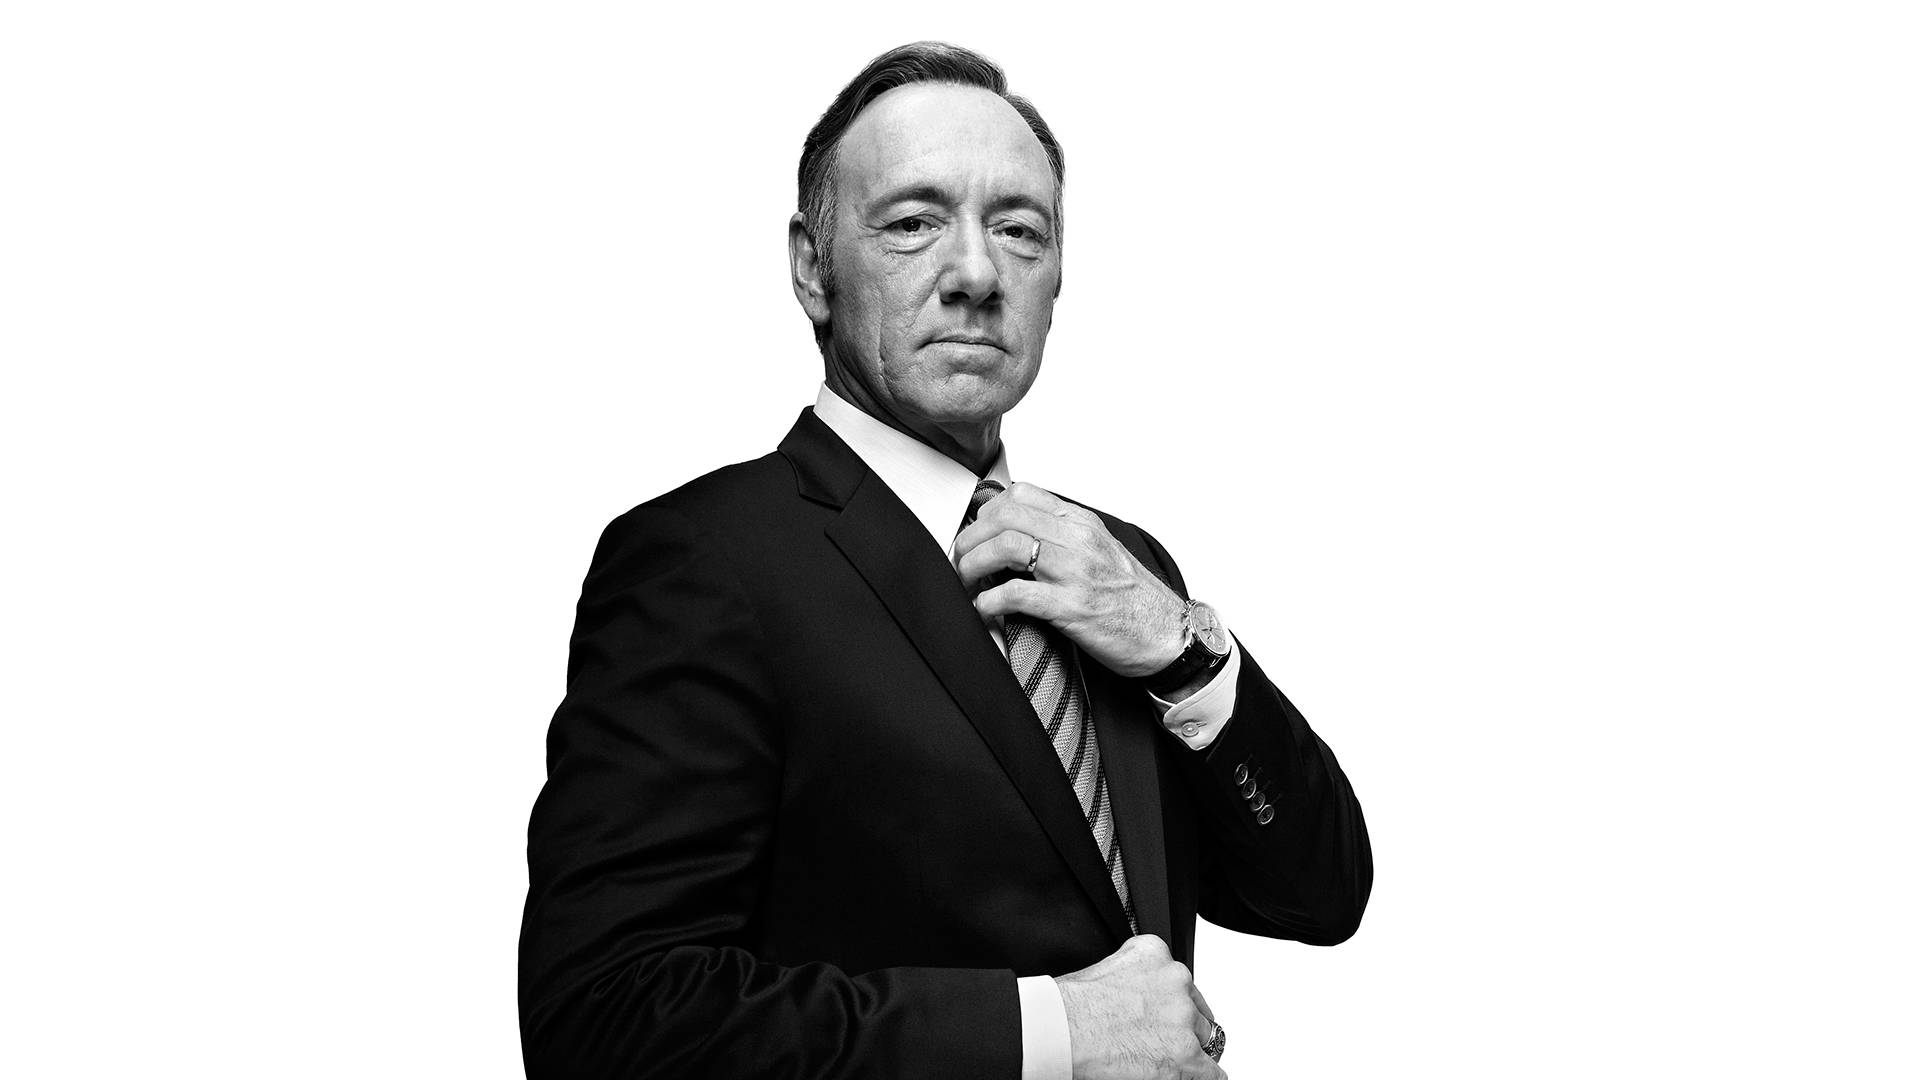 Mr Underwood Of House Of Cards Wallpaper